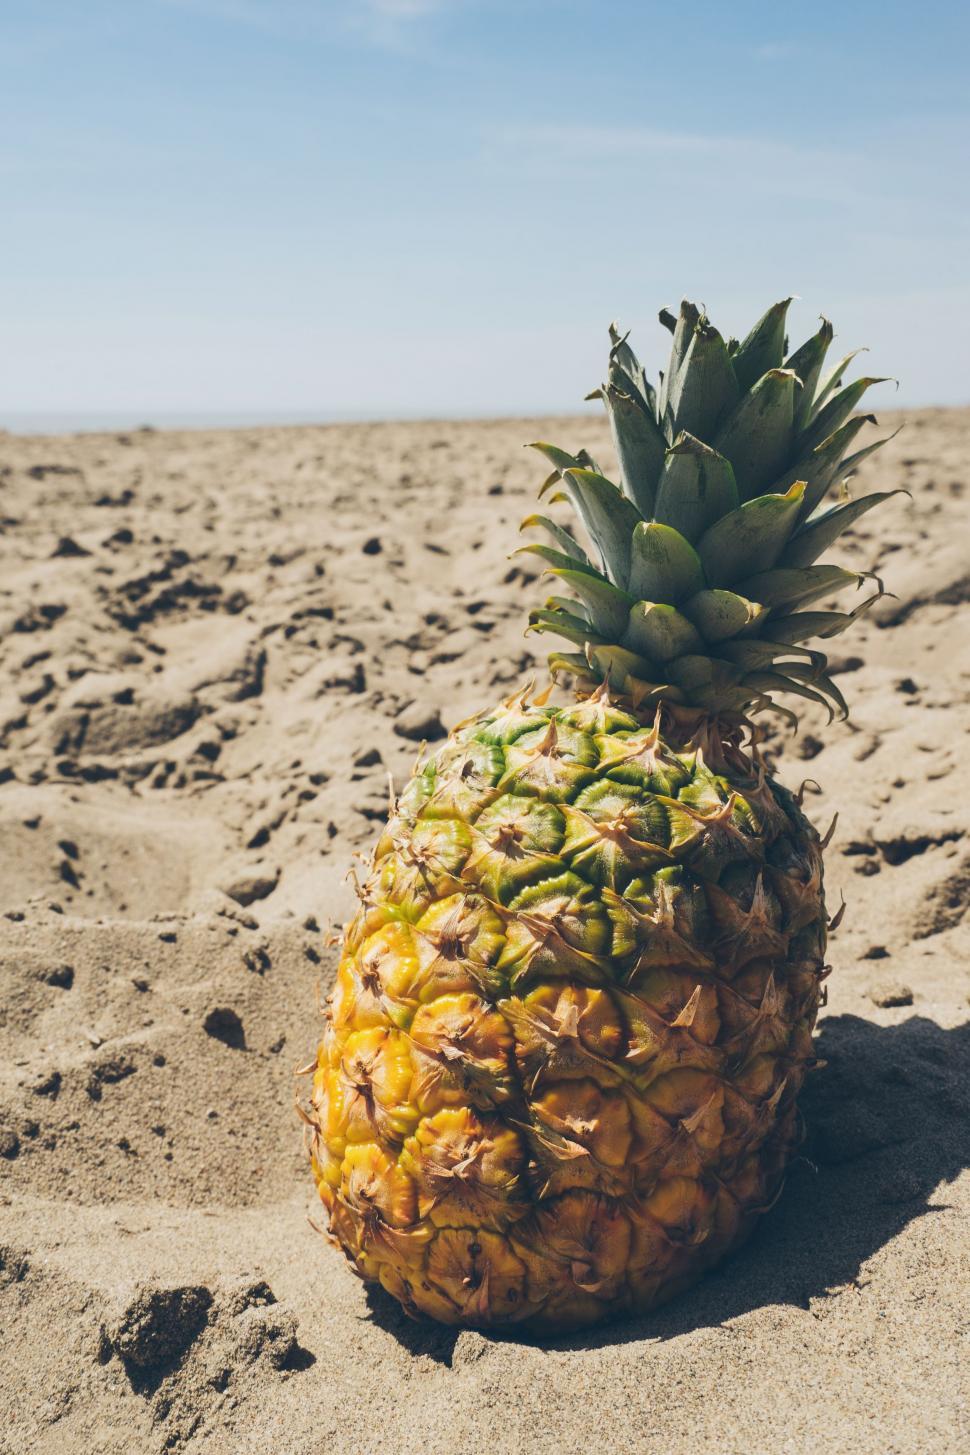 Free Image of Pineapple on beach sand in sunlight  